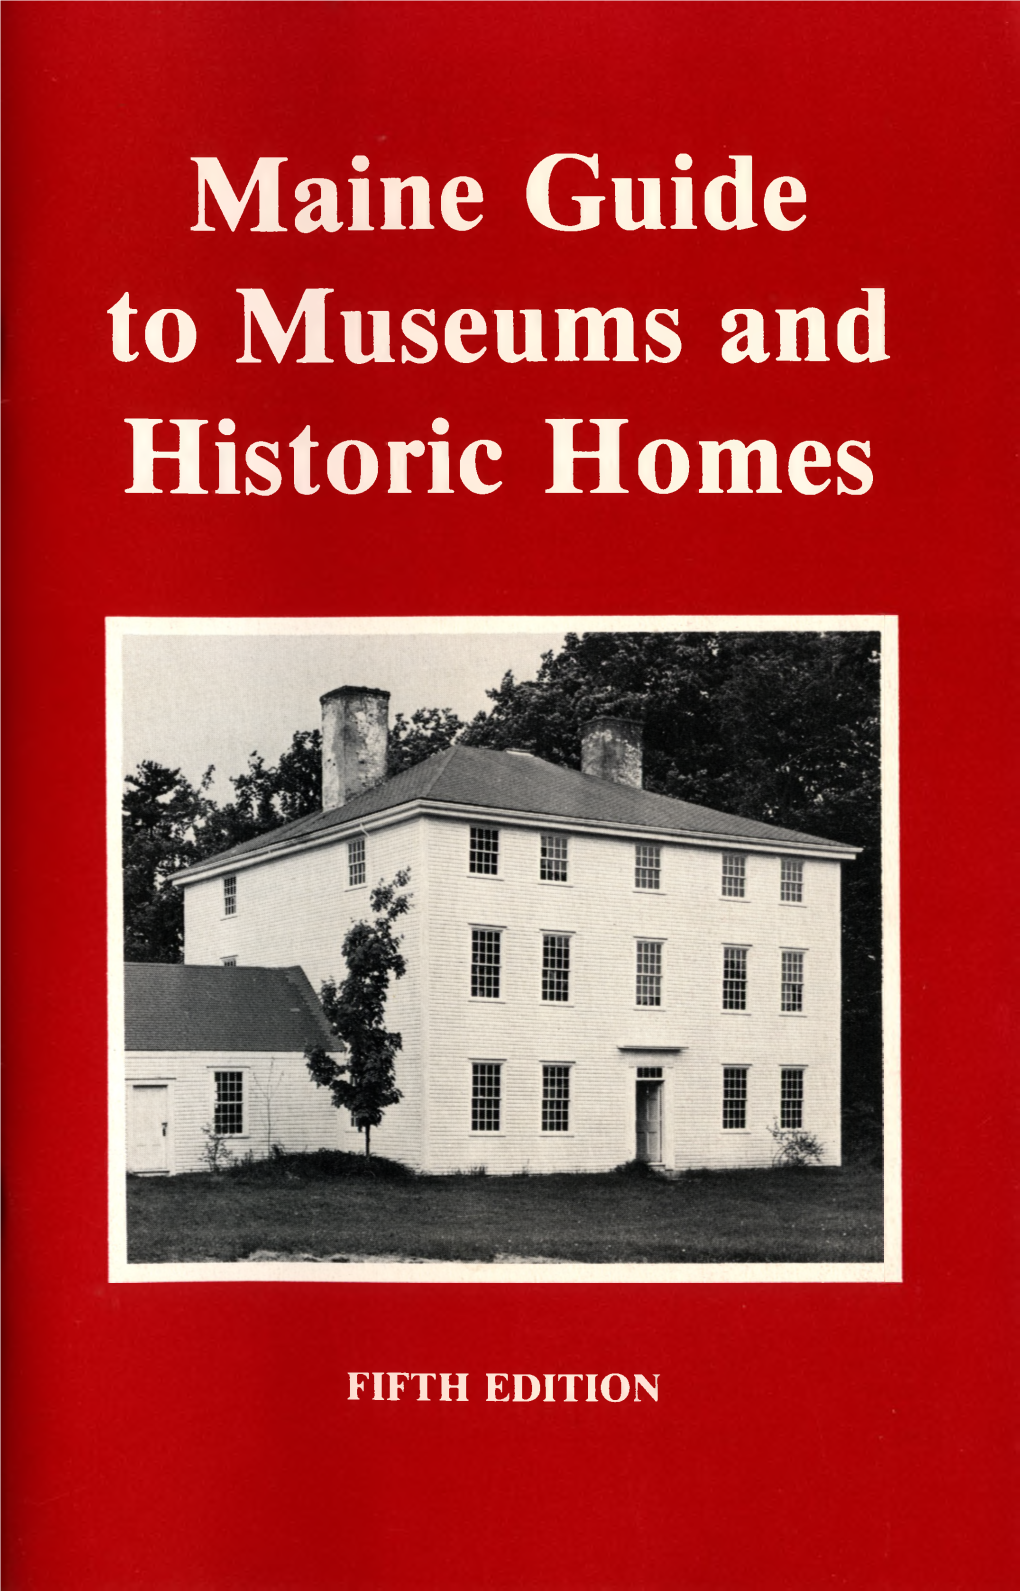 Maine Guide to Museums and Historic Homes